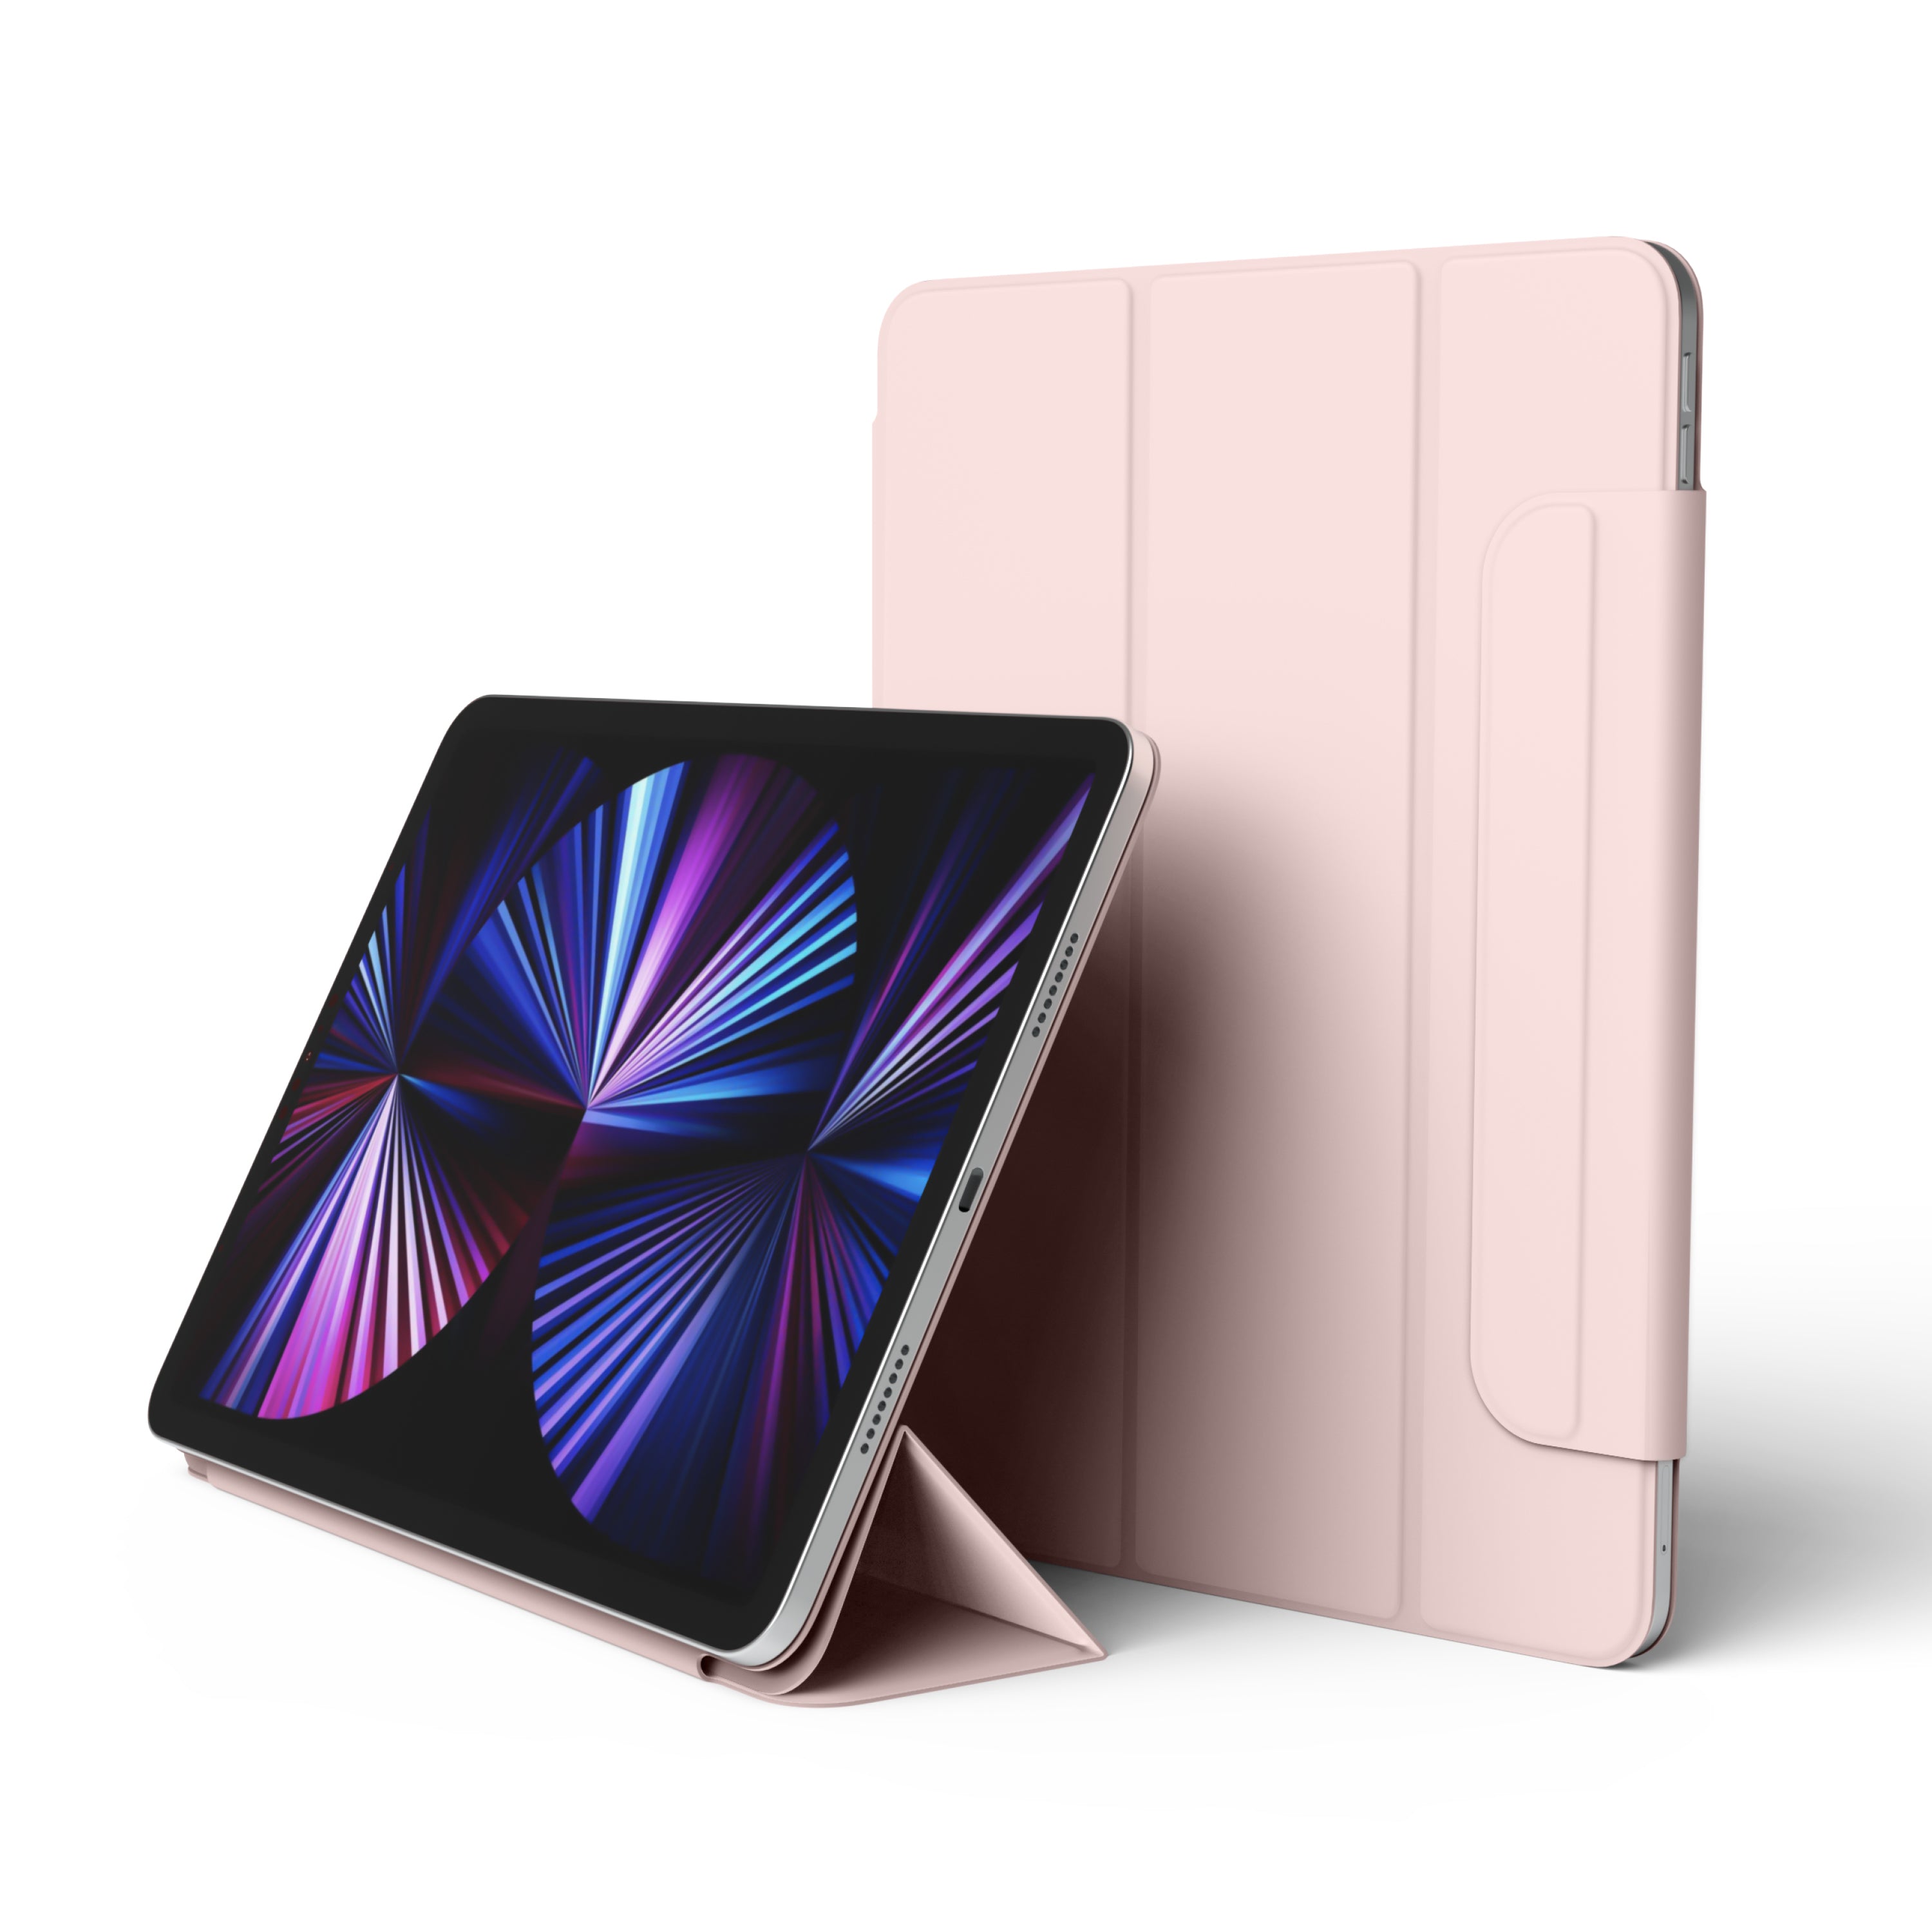 Smart Folio Case with Clasp for iPad Pro 11 inch 2nd, 3rd, 4th [3 Colors]